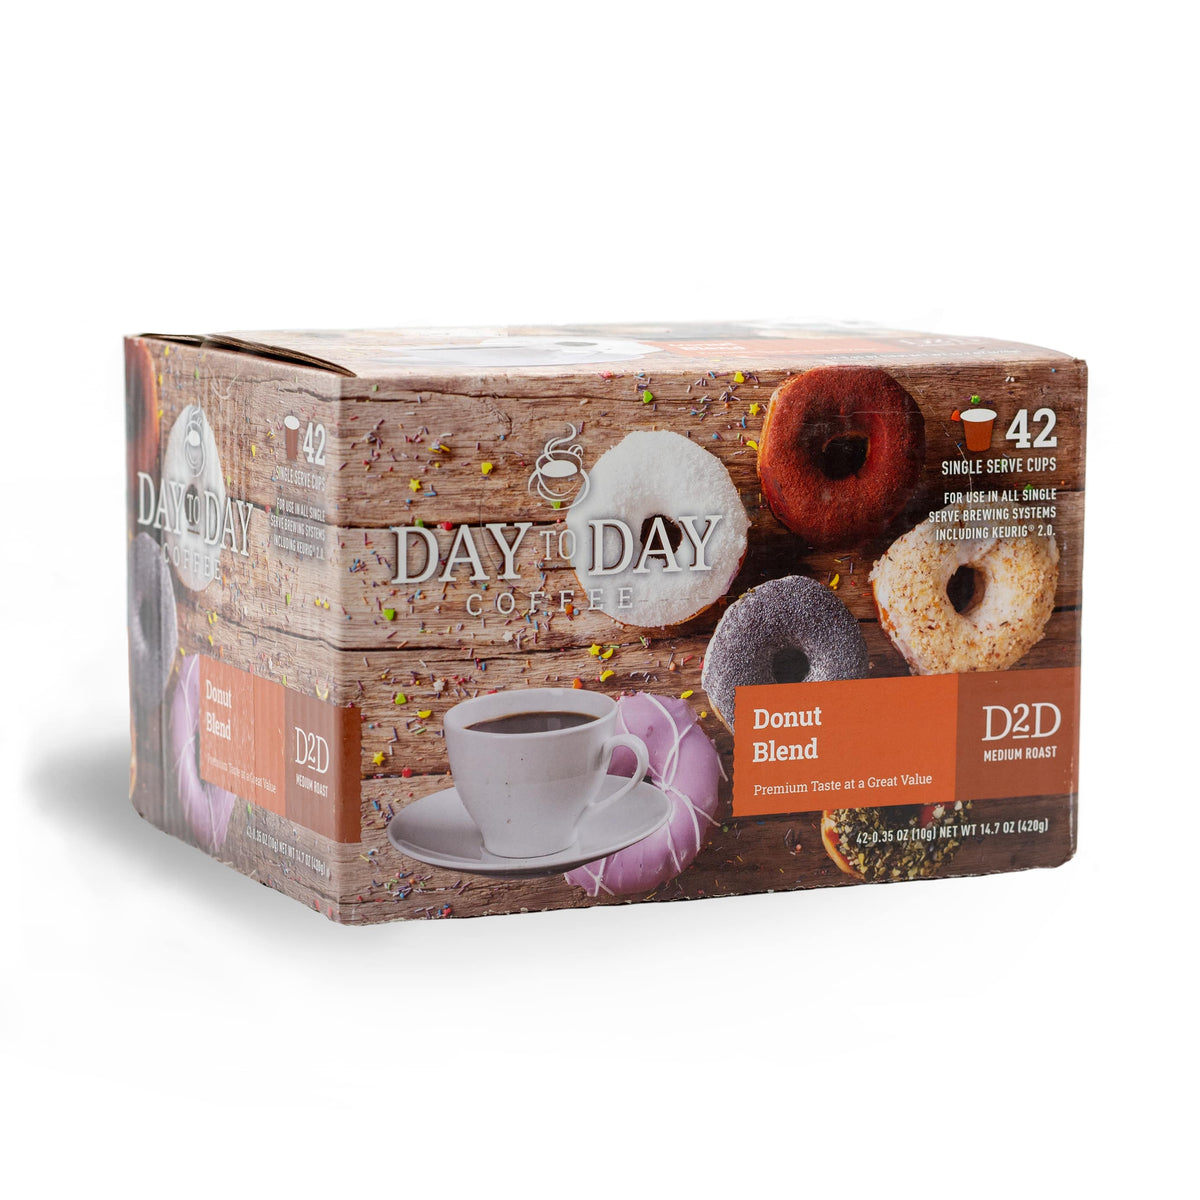 Day to day coffee 42 donut blend medium roast coffee pods for single serve coffee brewer